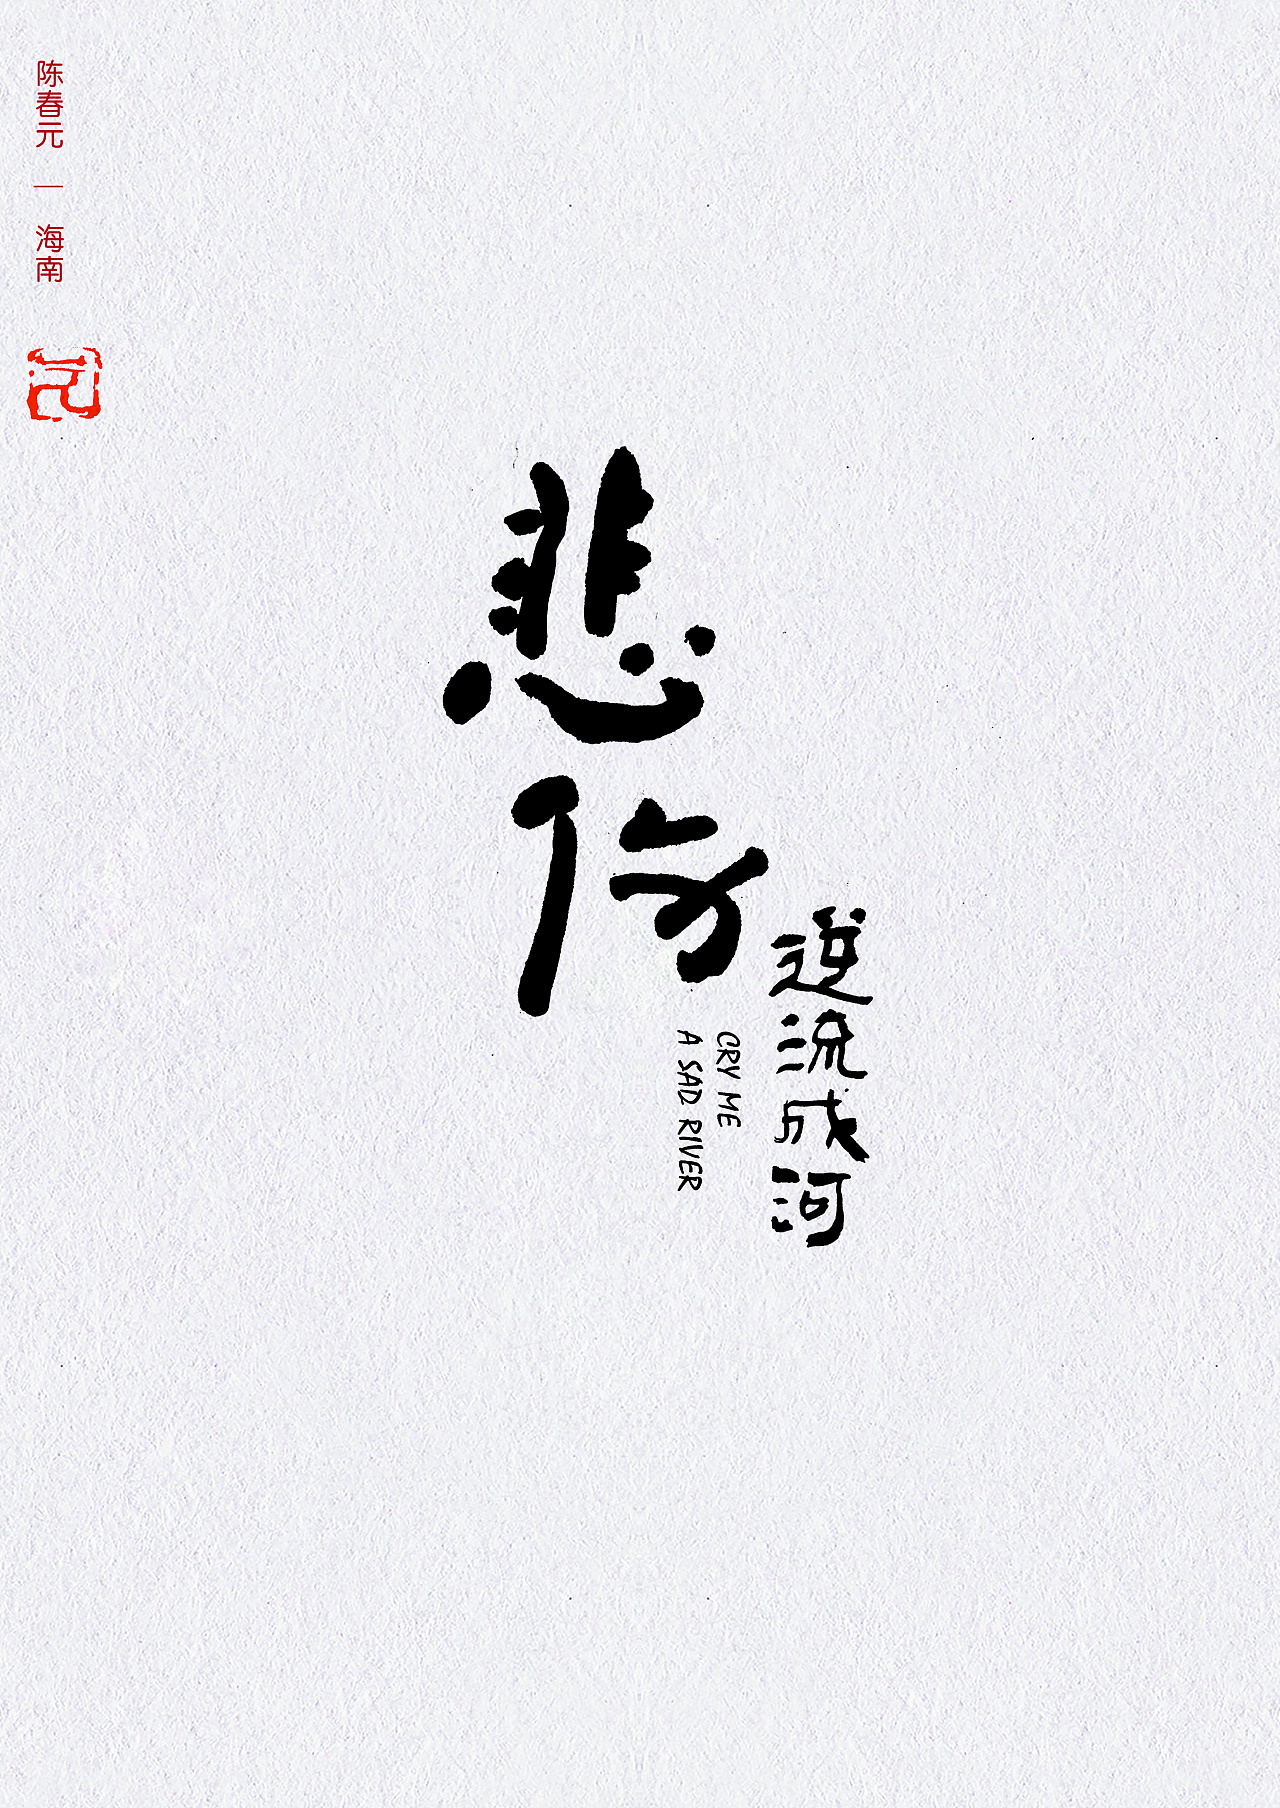 14P Chinese Poster Font Design